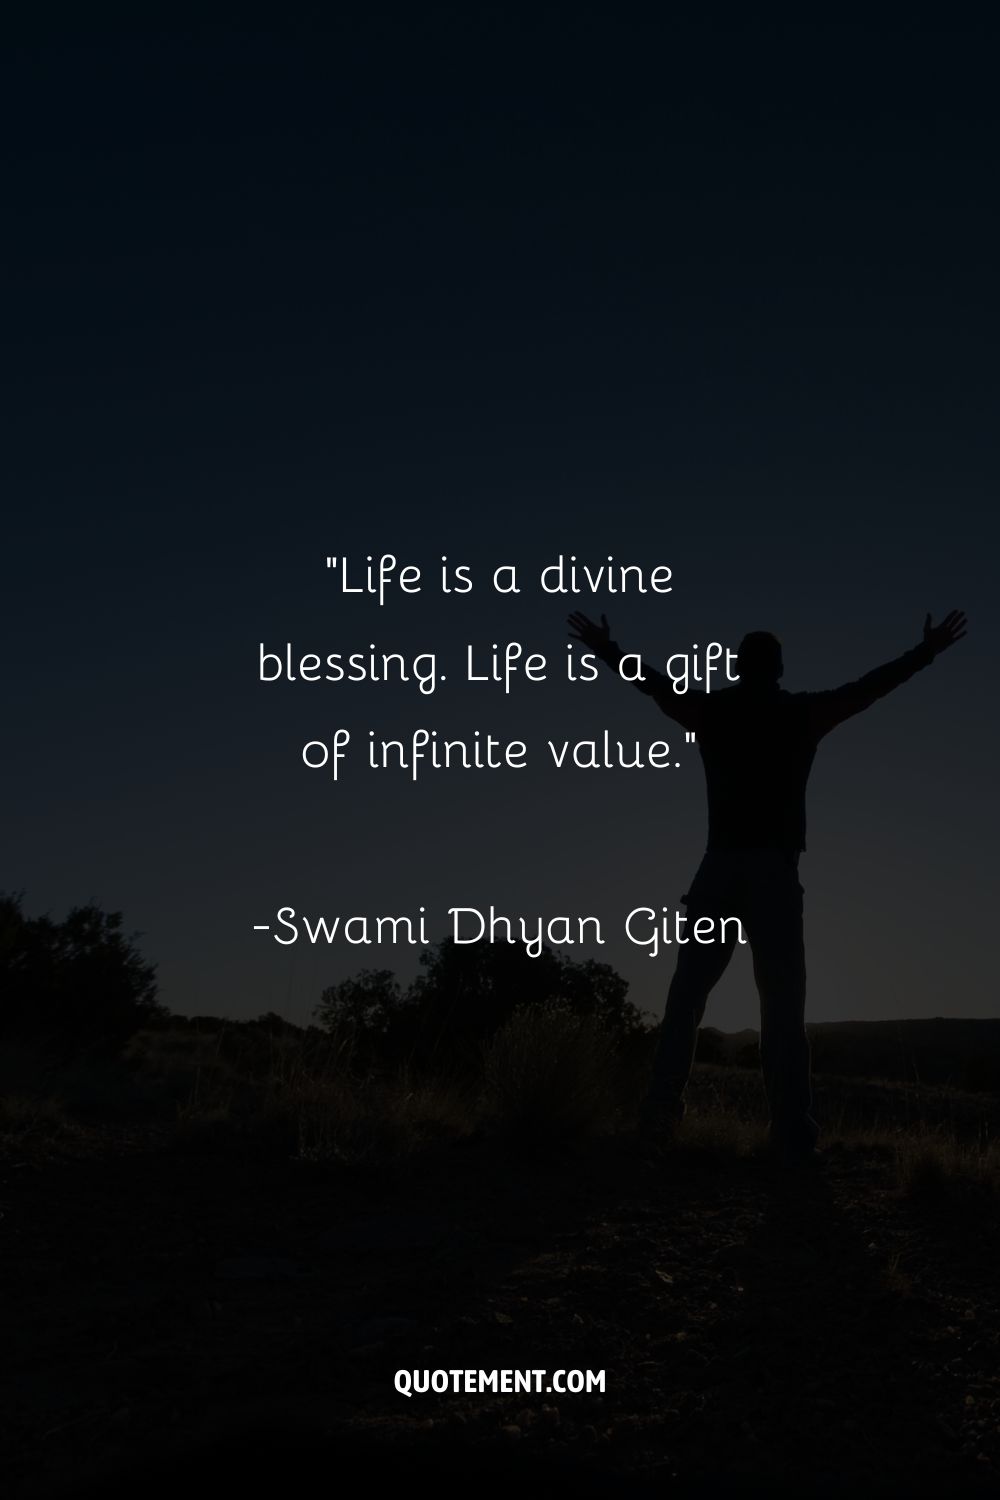 “Life is a divine blessing. Life is a gift of infinite value.”